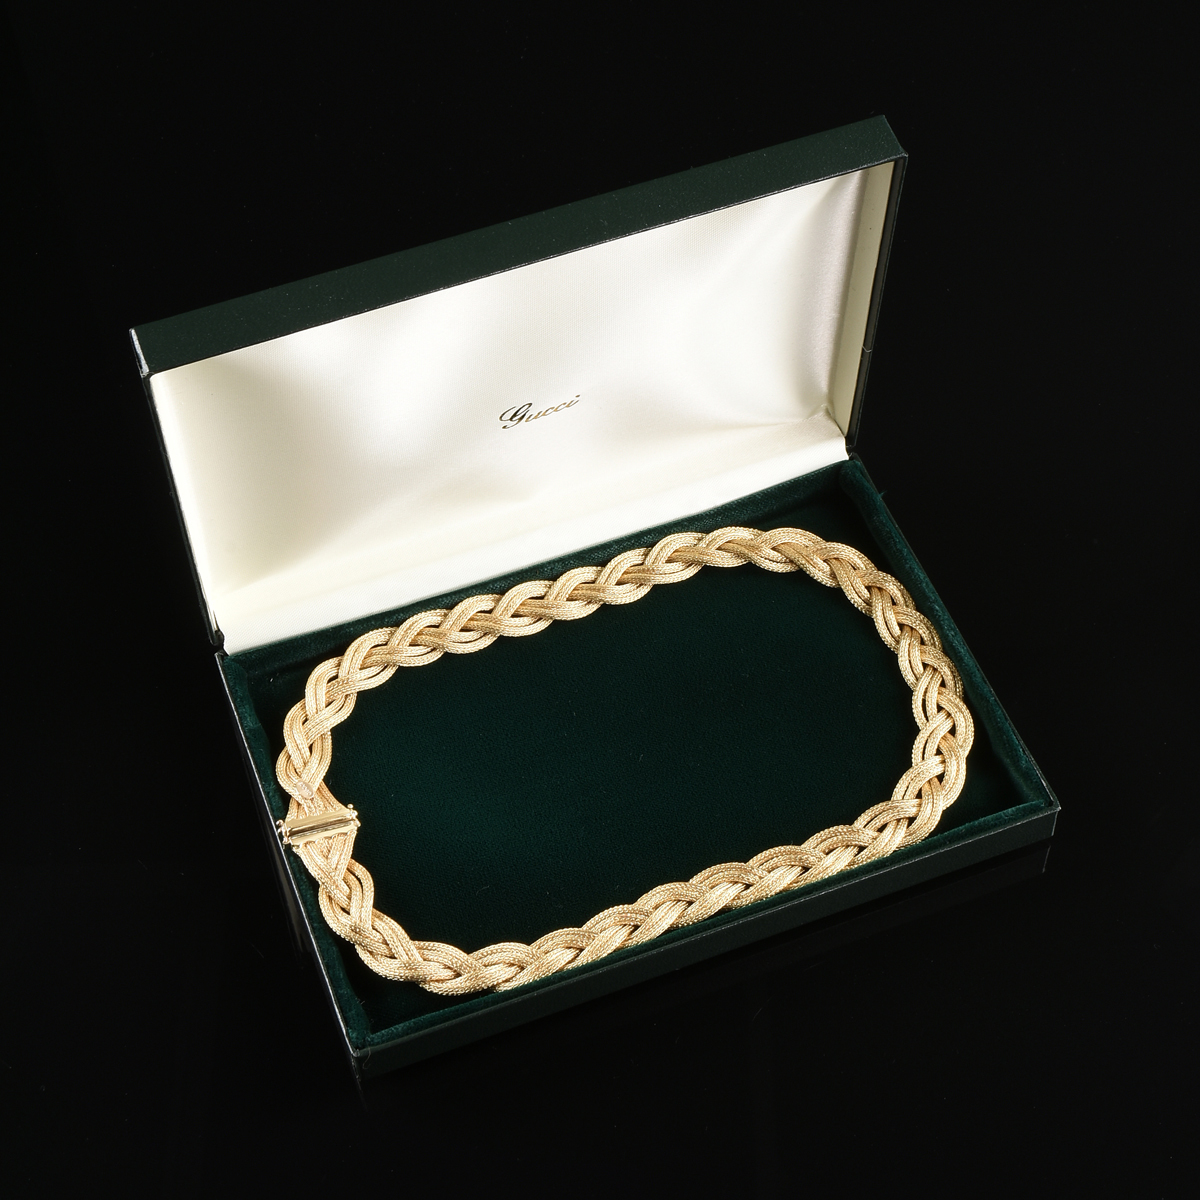 AN 18K YELLOW GOLD GUCCI NECKLACE, the double rope braided design with hidden push-button box - Image 4 of 4